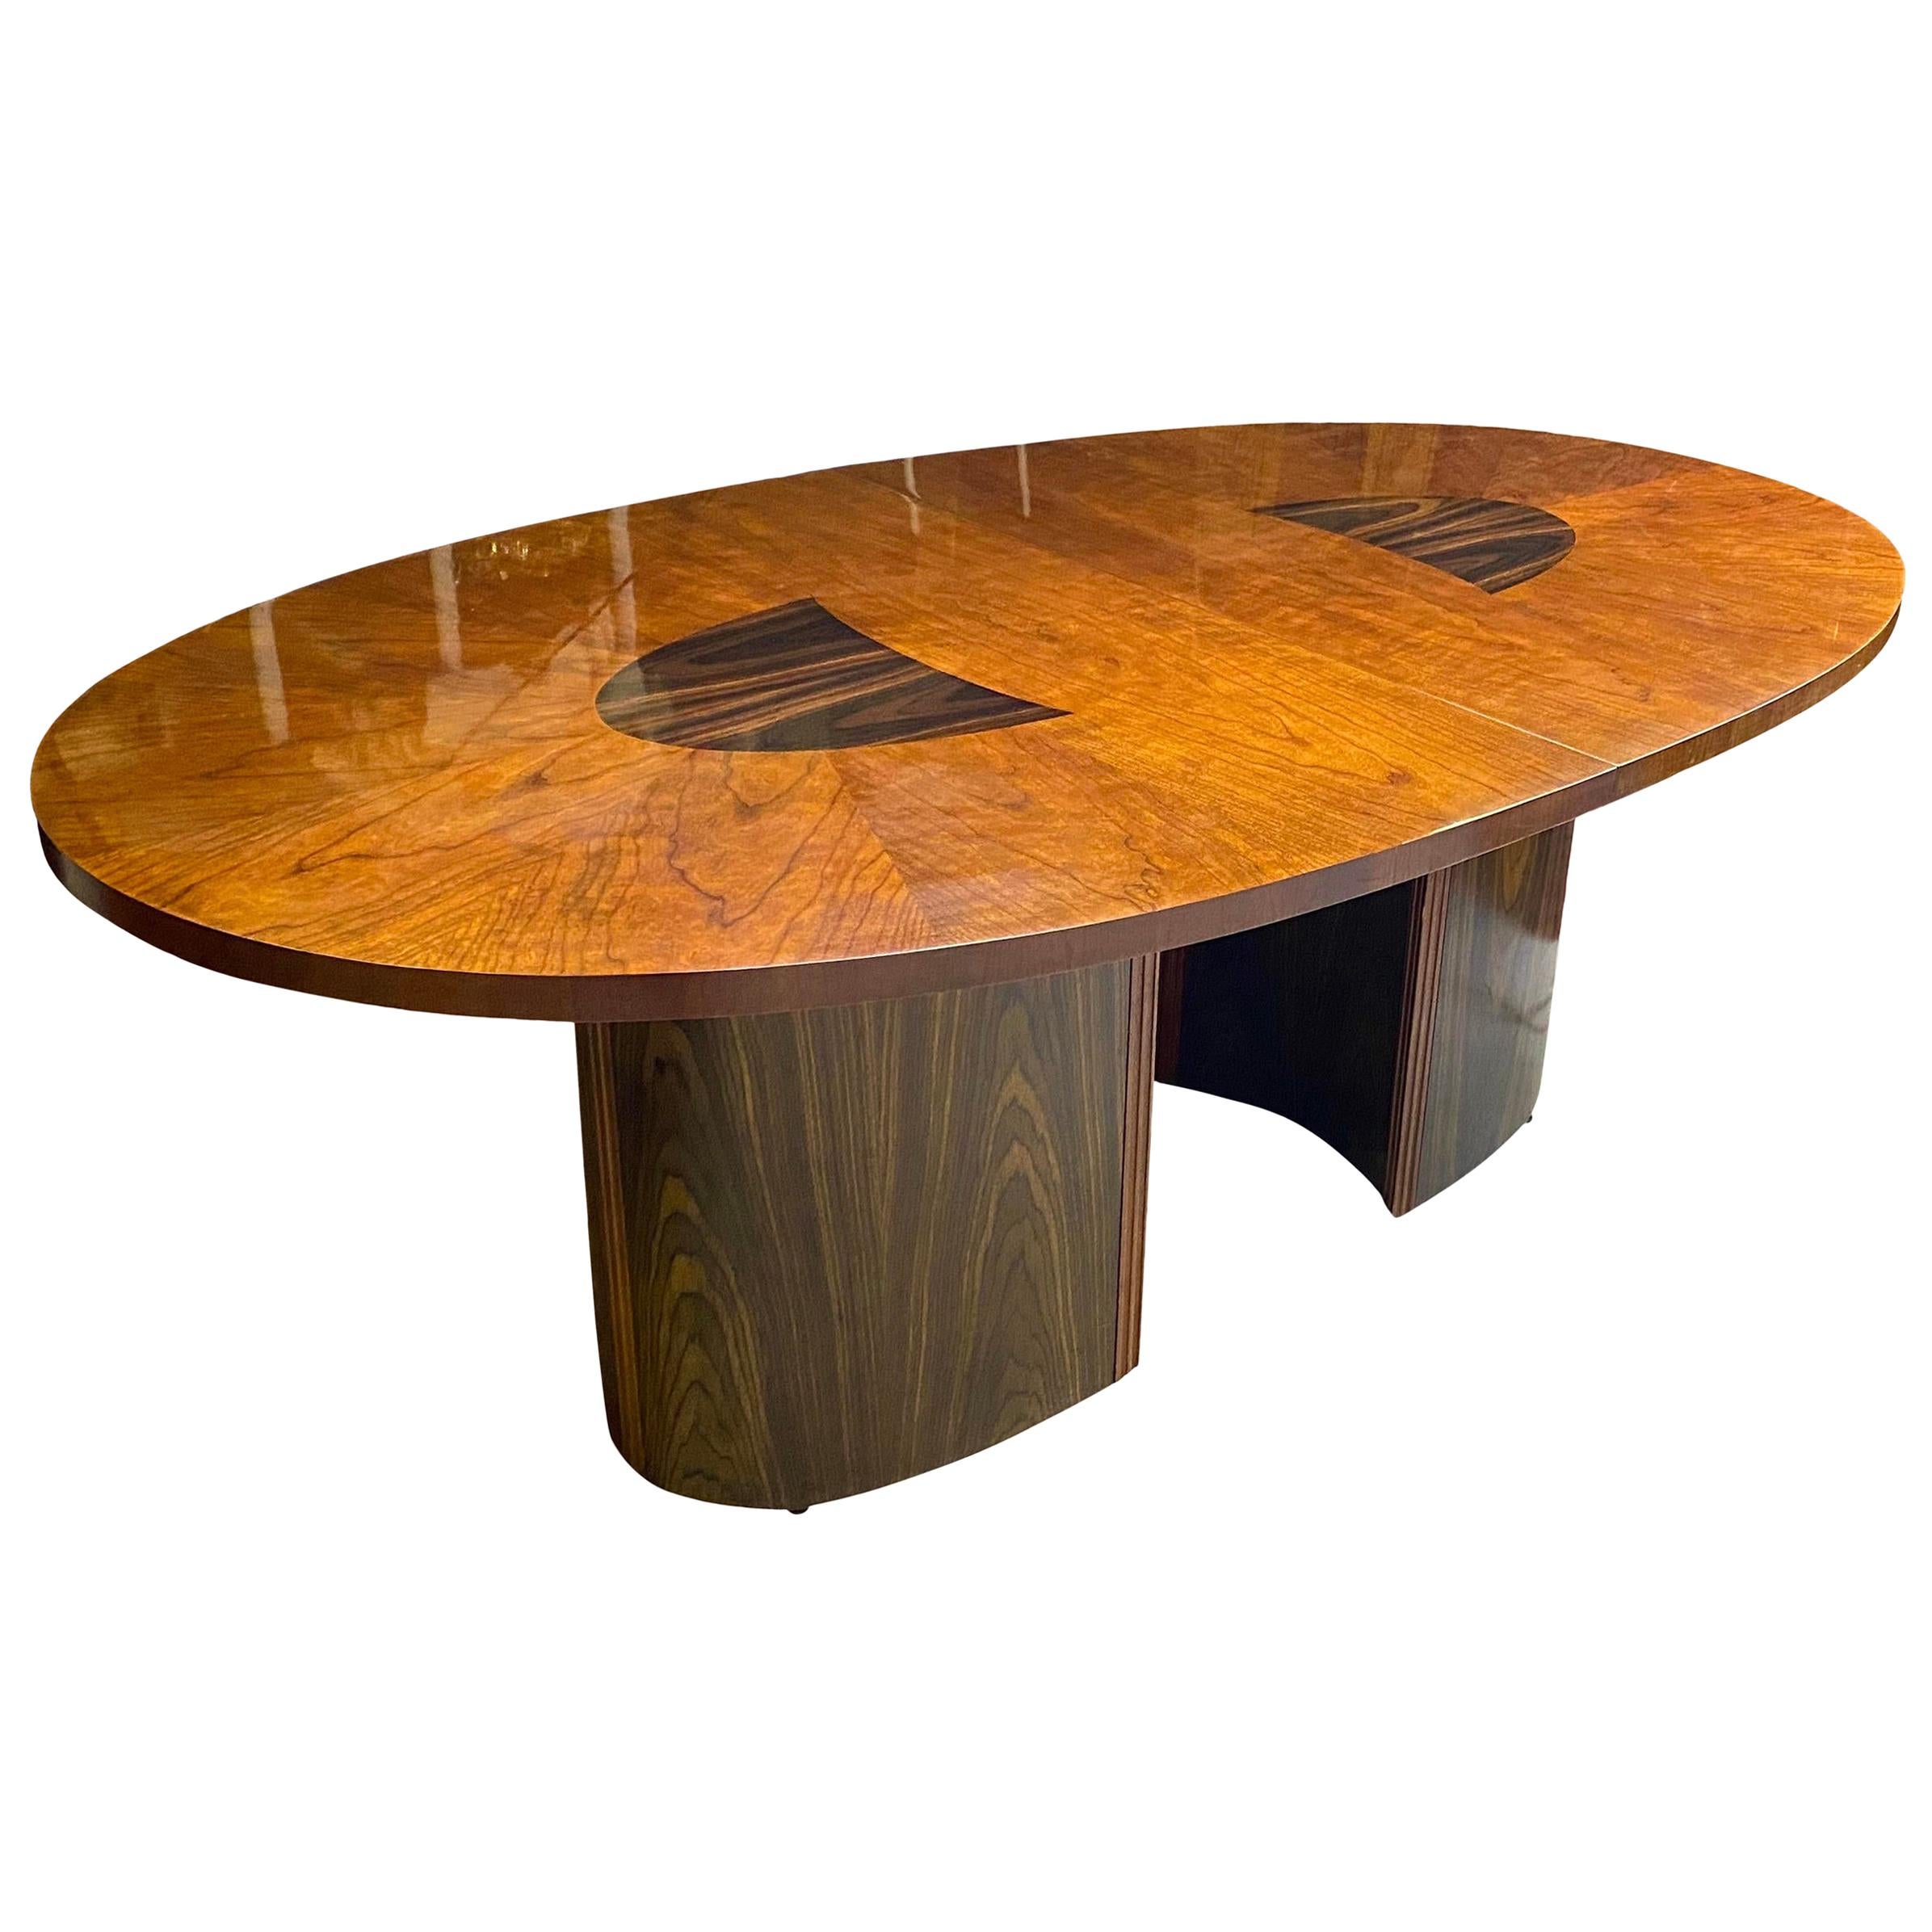 Modest henredon round dining table Henredon Dining Room Tables 18 For Sale At 1stdibs